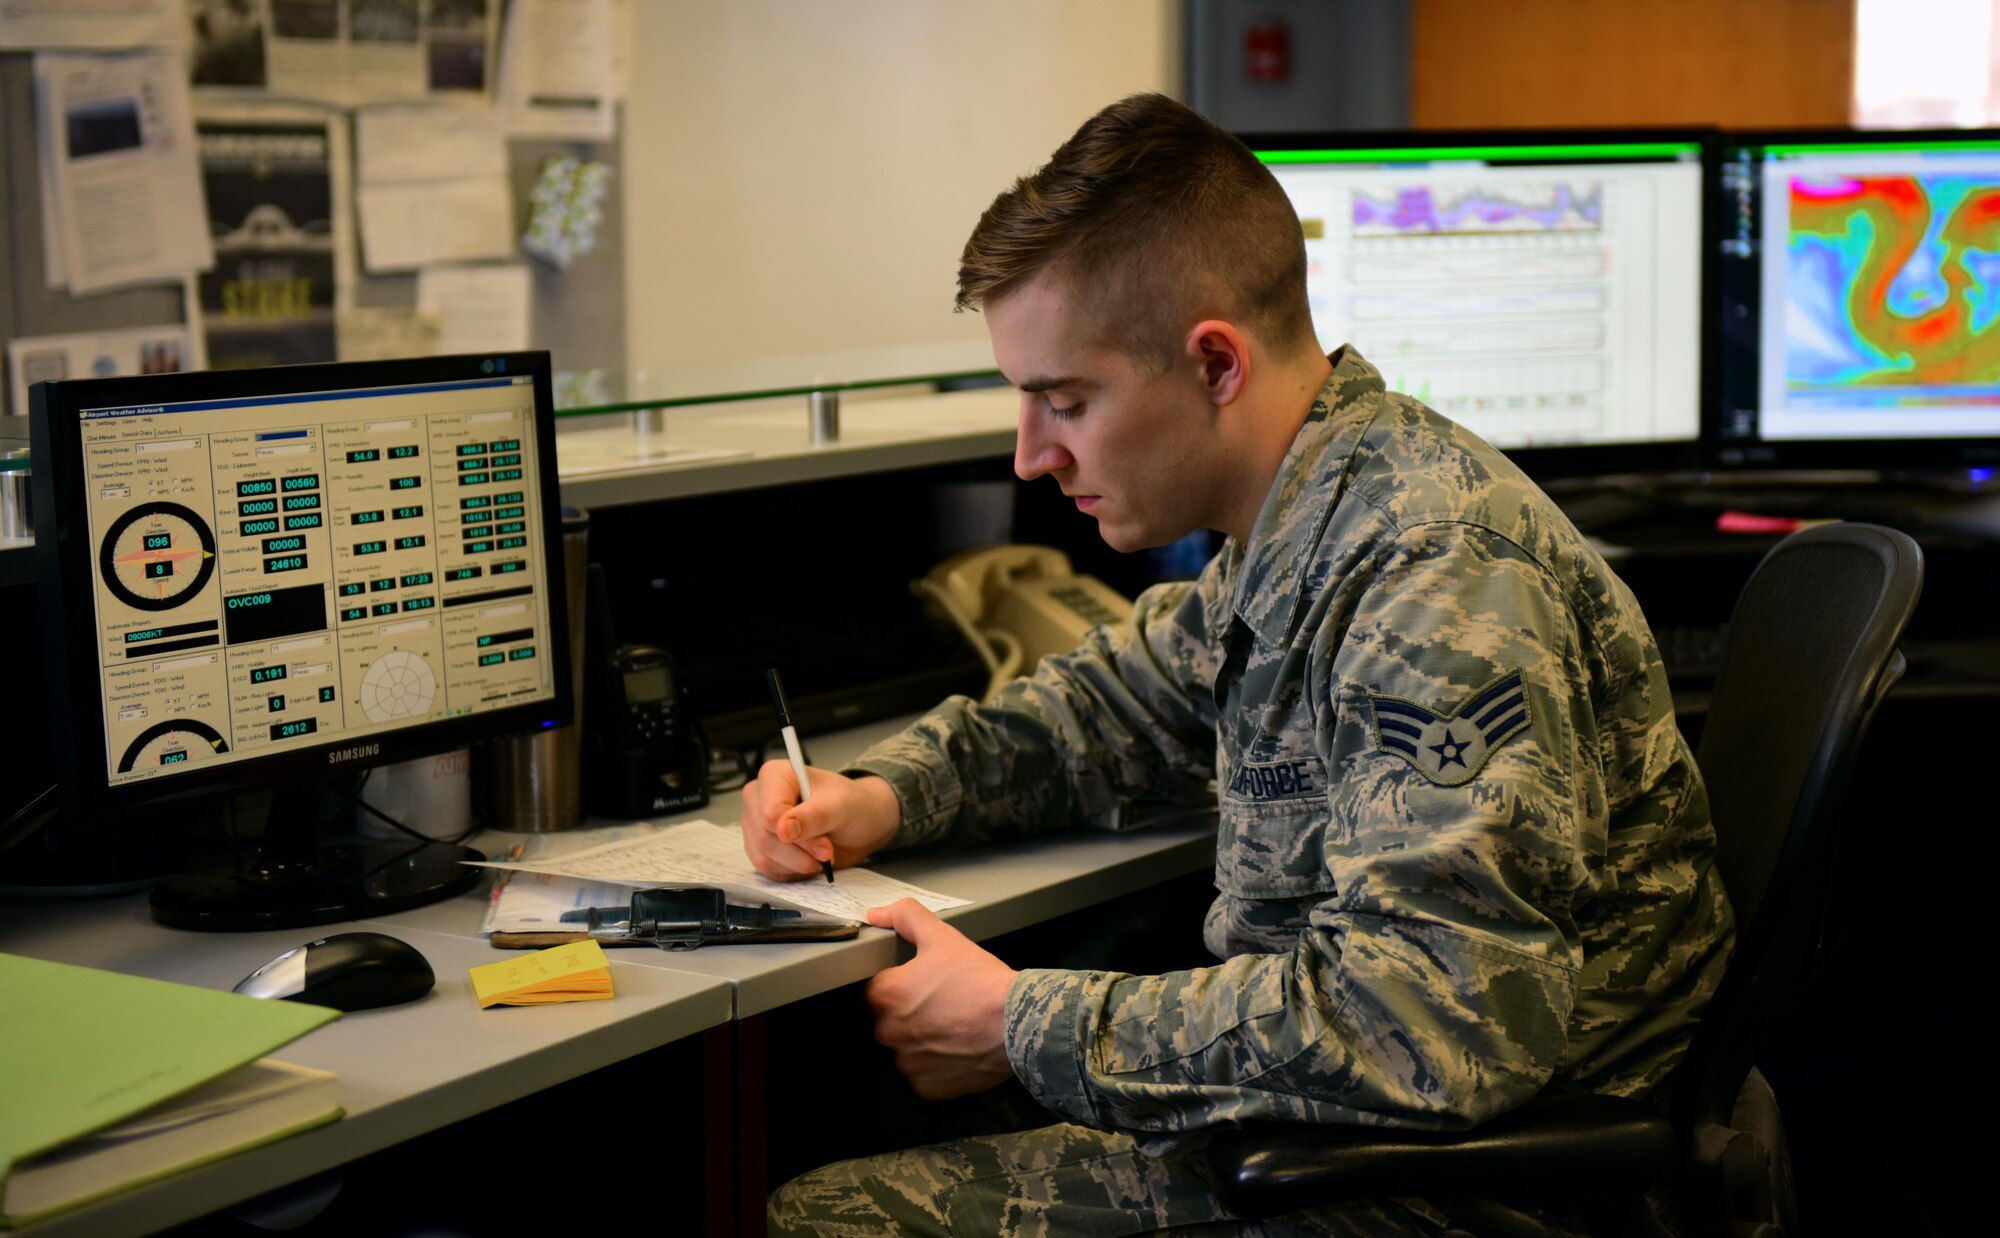 U.S. Air Force Senior Airman Alex Knowles, a weather forecaster assigned to the 509th Operations Support Squadron, jots down weather sensor data to relay to an aircrew at Whiteman Air Force Base, Mo., March 28, 2017. Personnel assigned to the weather flight are capable of deploying in support of operations around the world with specialized equipment, such as a deployable weather station. (U.S. Air Force photo by Airman 1st Class Jazmin Smith)